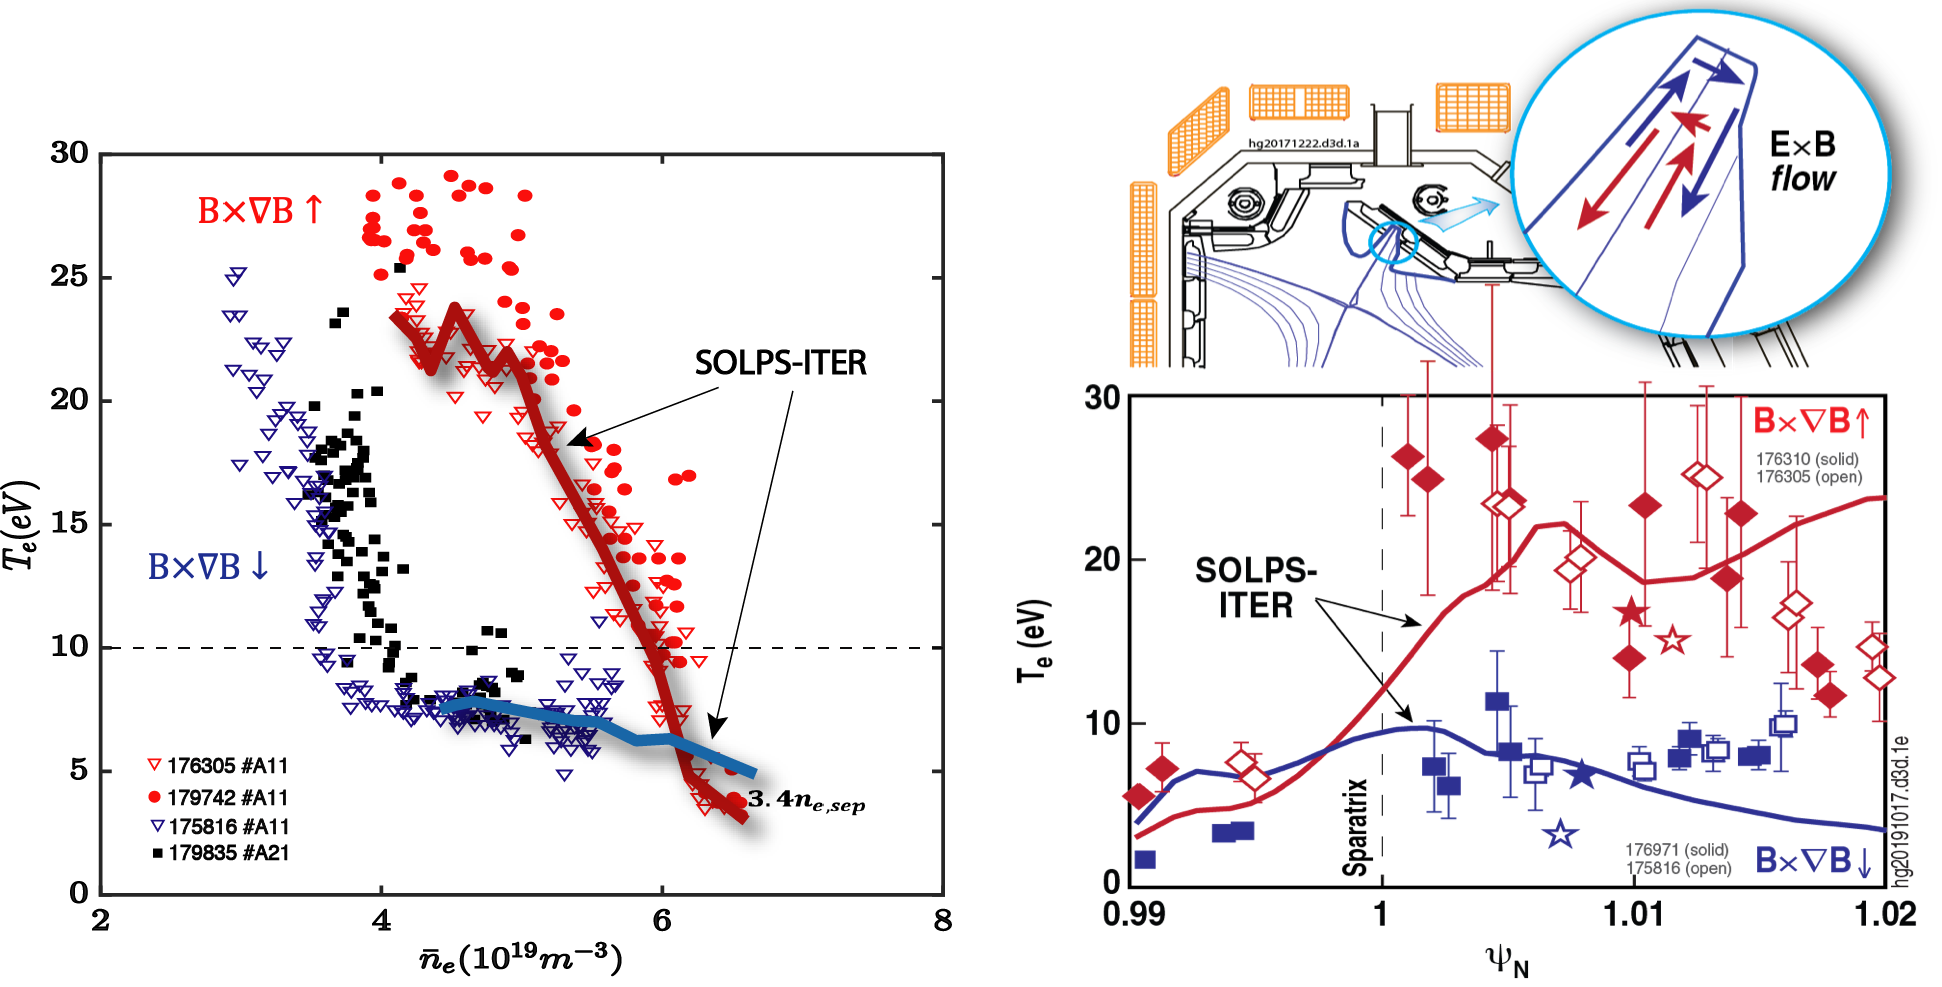 Left: Langmuir Probe Te at the target versus line-averaged density for SAS, with the strike point near the slot outer corner, for ion $B \times \nabla B$ drift toward the divertor (red) and away from the divertor (blue). Solid line represents the results of SOLPS-ITER modelling at similar radial locations, with assumption of $n ̅_e/n_{e,sep}$ ~ 3.4 based on experimental estimations at different densities. Right: Radial profiles of Te across the divertor target for the different ion $B \times \nabla B$ drift directions at a same line-averaged density ~$5 \times 10^{19}m ^{-3}$.